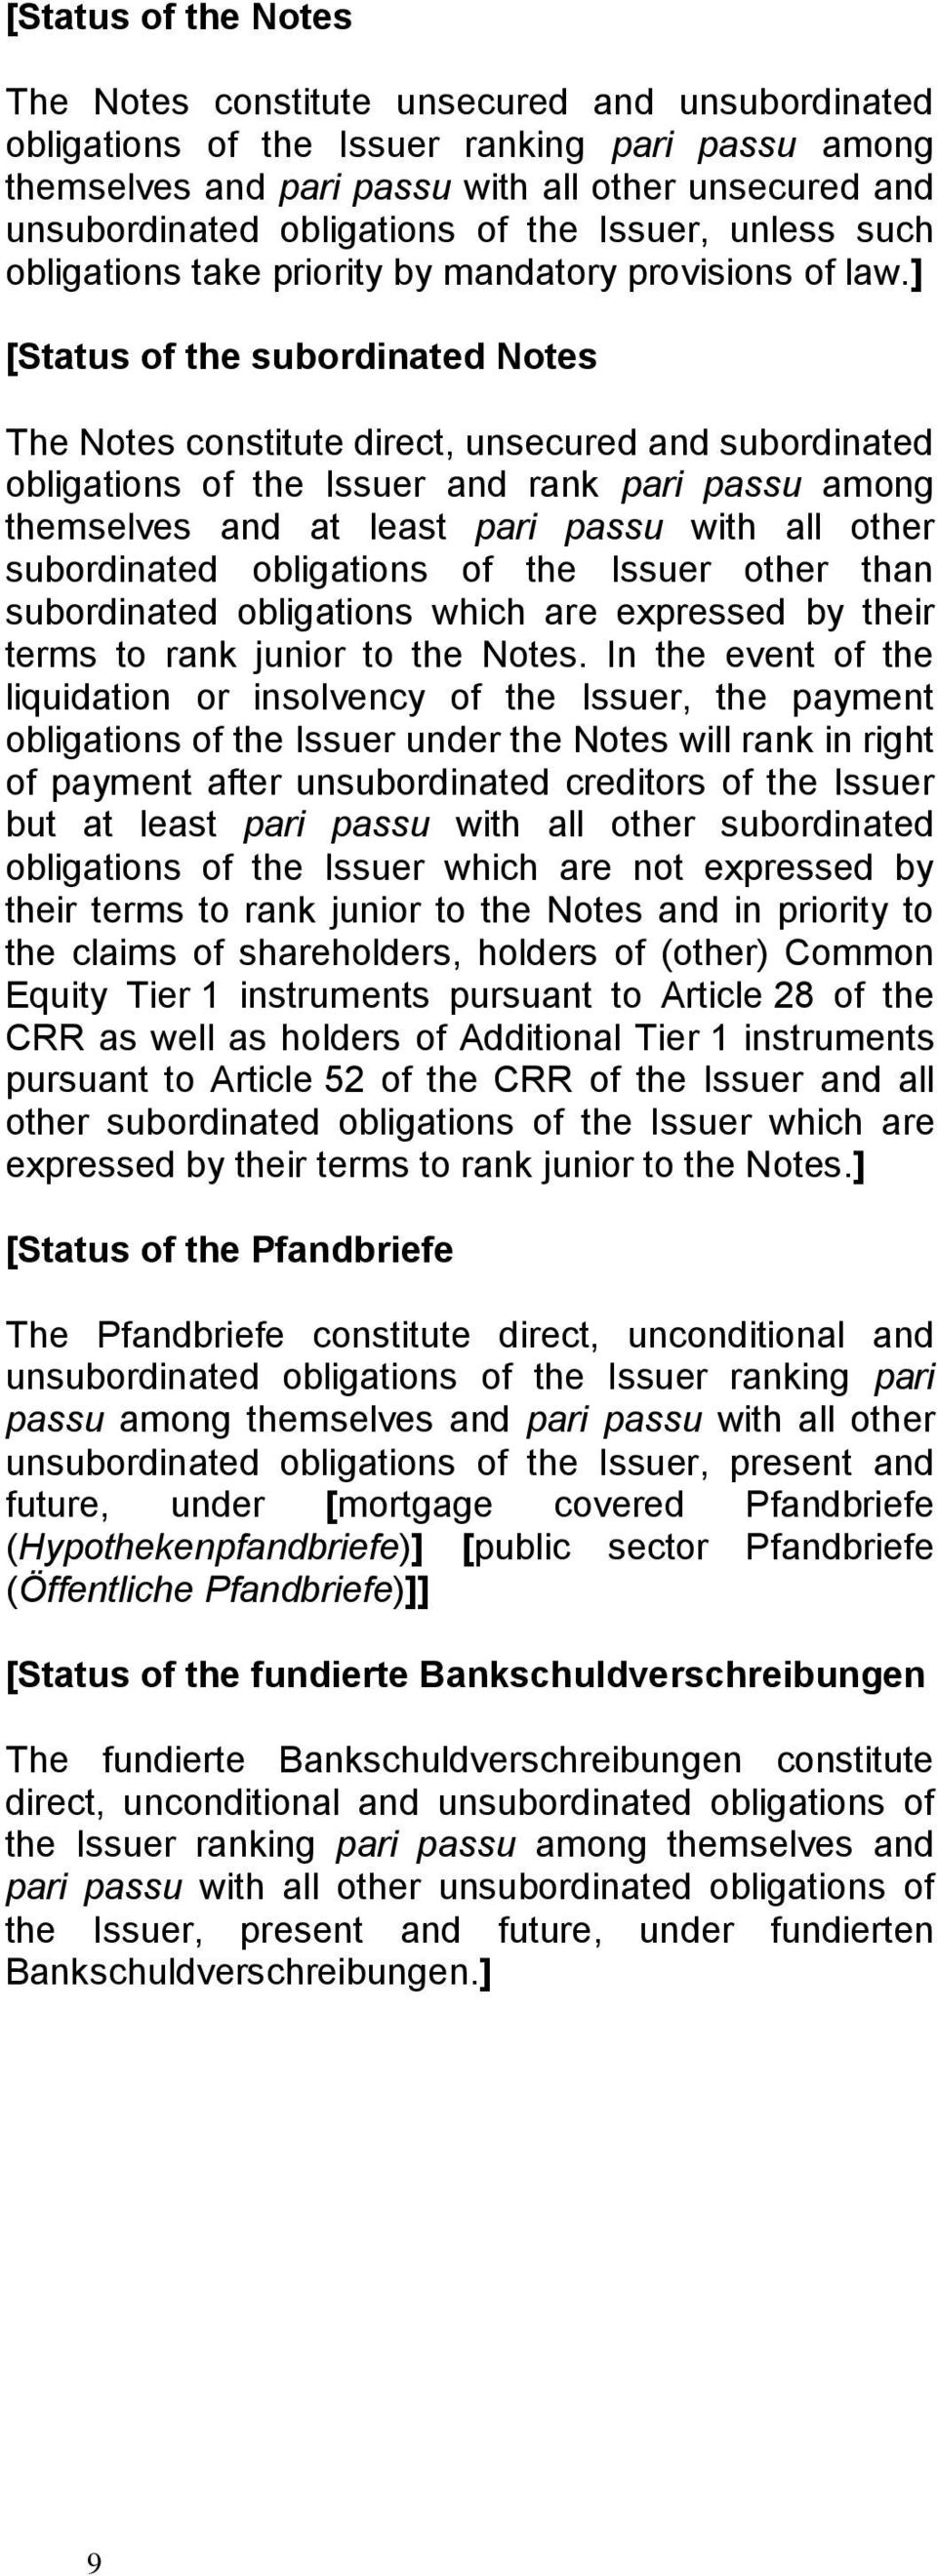 ] [Status of the subordinated Notes The Notes constitute direct, unsecured and subordinated obligations of the Issuer and rank pari passu among themselves and at least pari passu with all other